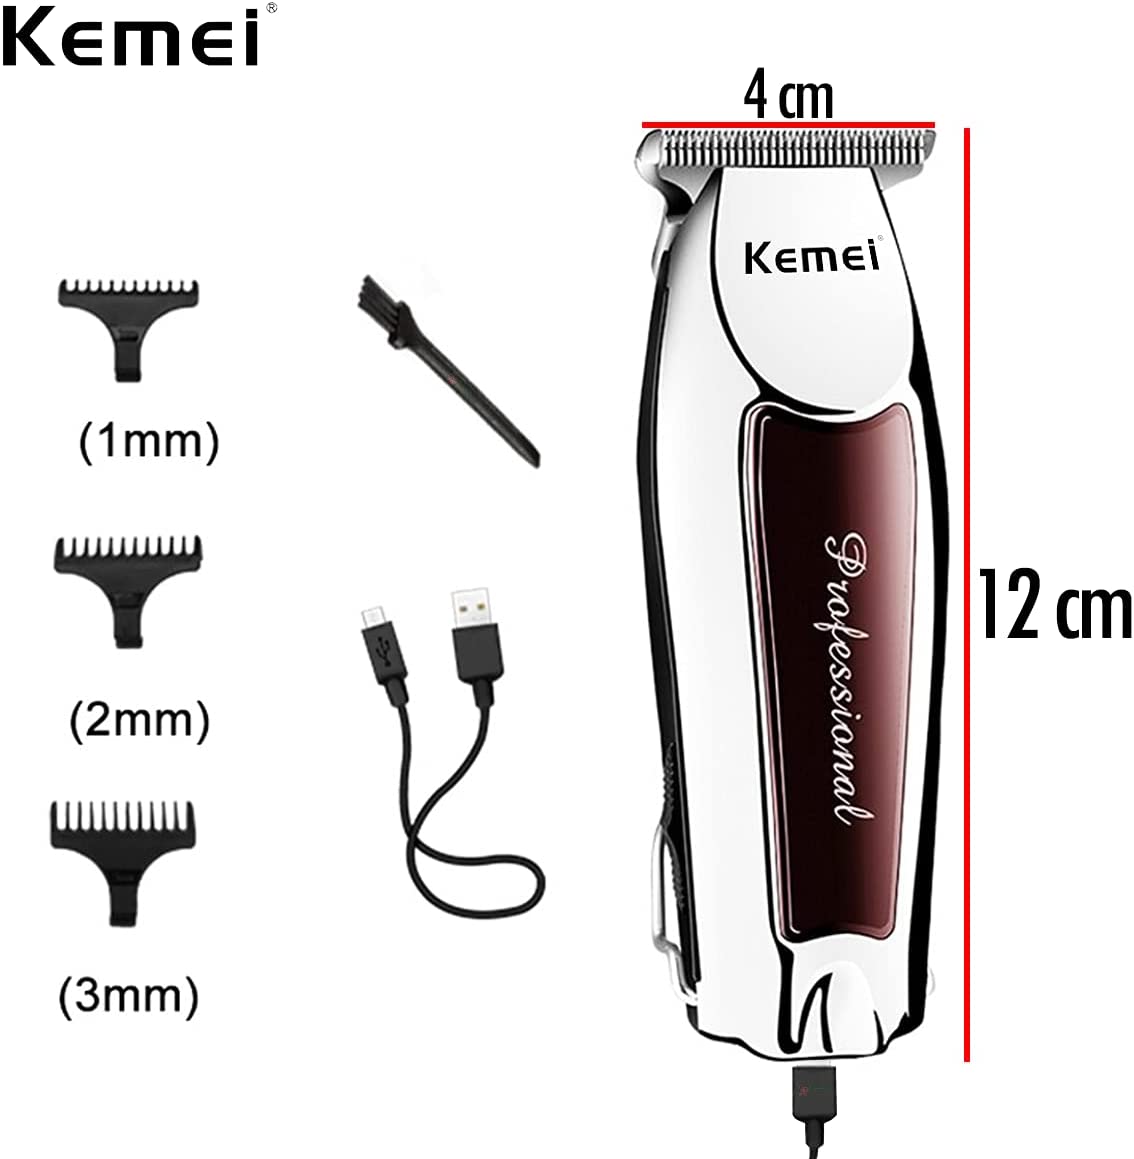 Kemei Electric Hair Clipper for men, for dry use, Brown, KM-9163